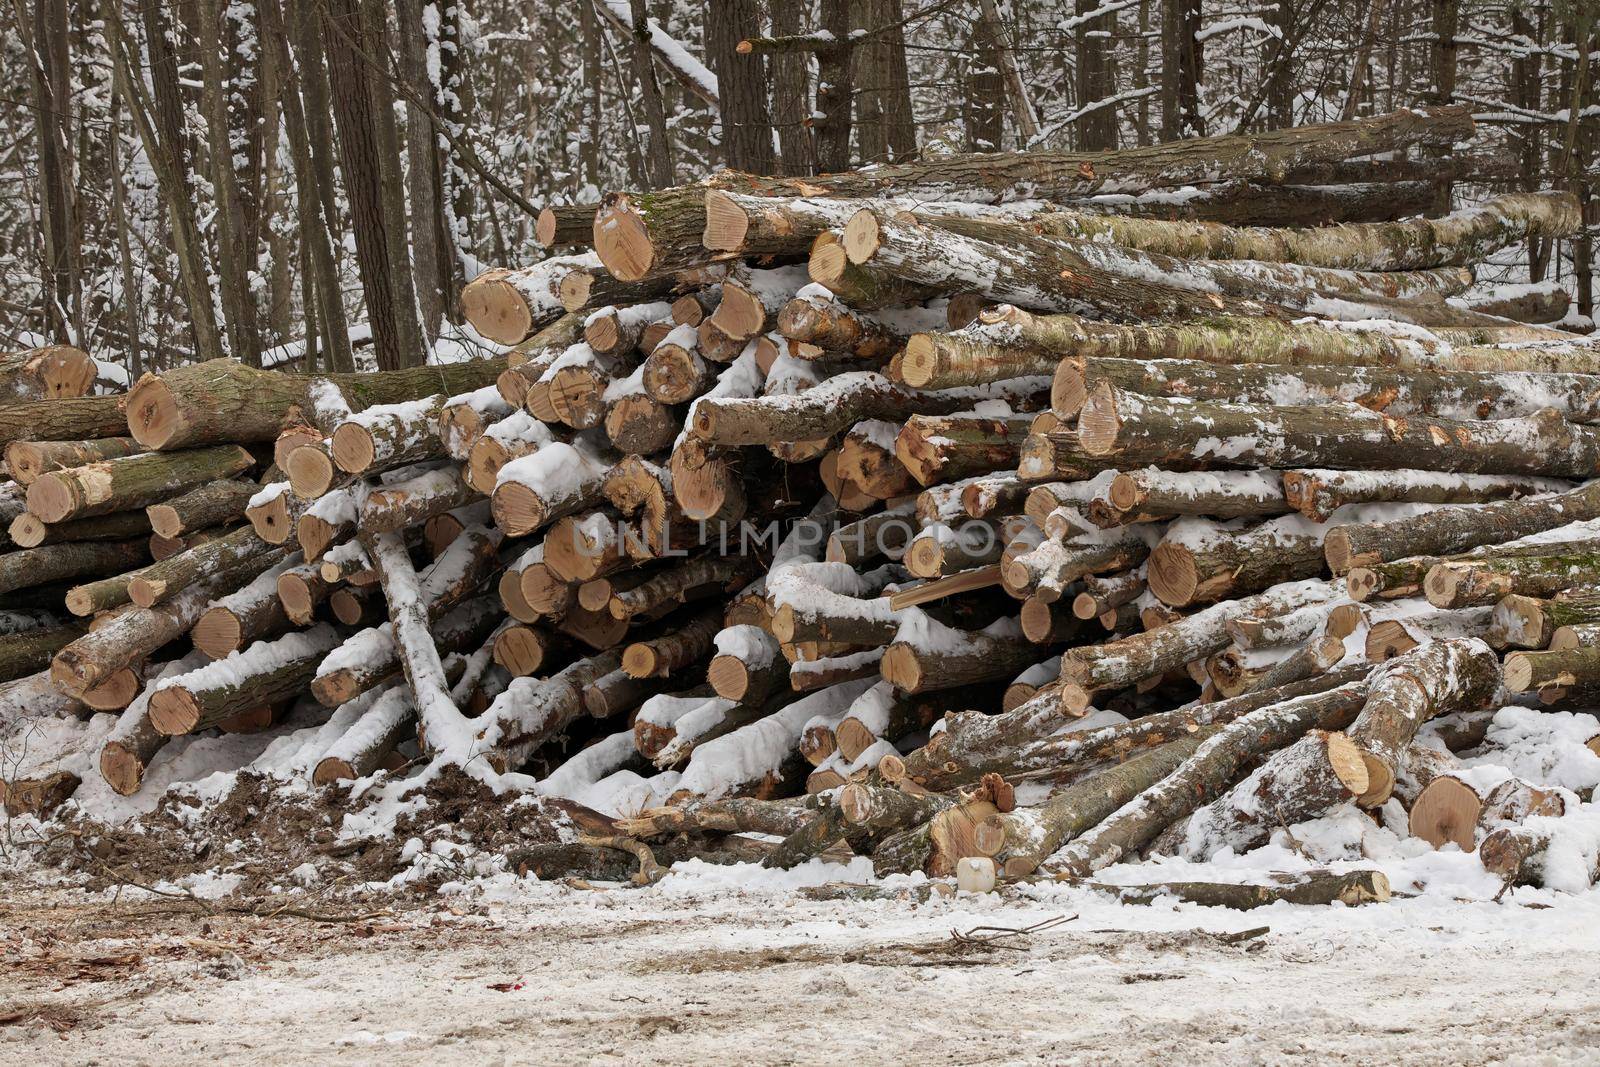 Freshly Harvested Timber from a Logging Operation Piled by the Forest in Winter by markvandam